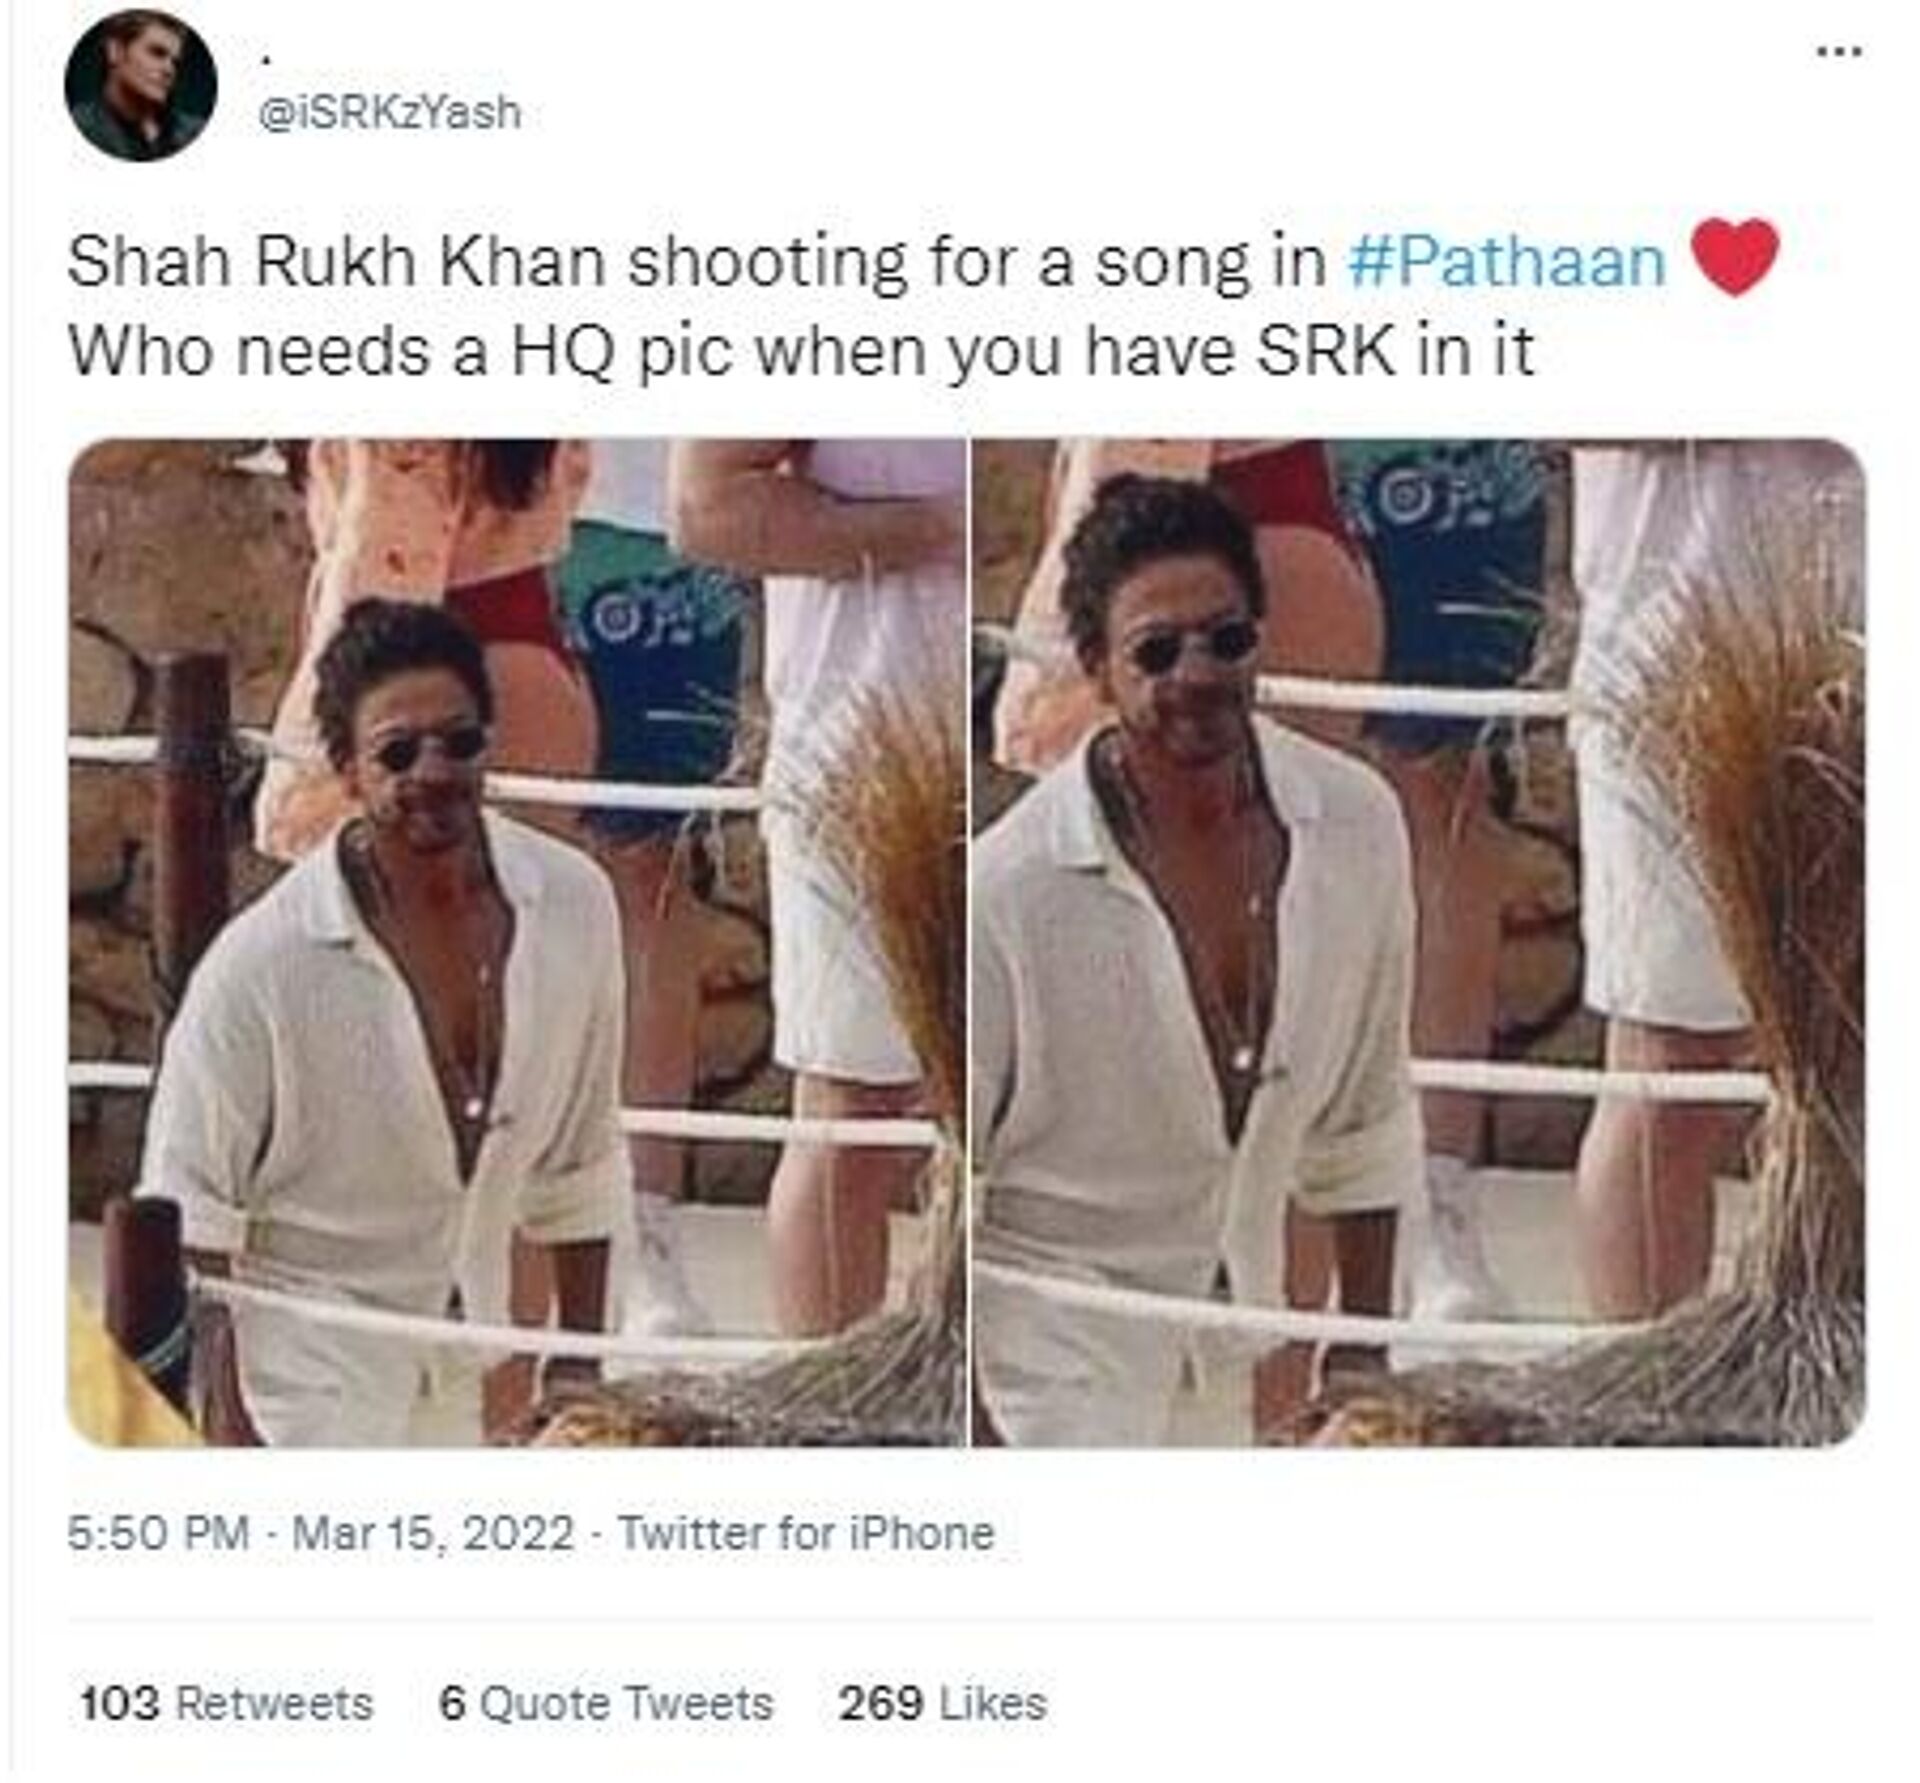 Netizens react to Bollywood superstar Shah Rukh Khan's leaked topless pictures from shooting sets in Spain - Sputnik International, 1920, 16.03.2022